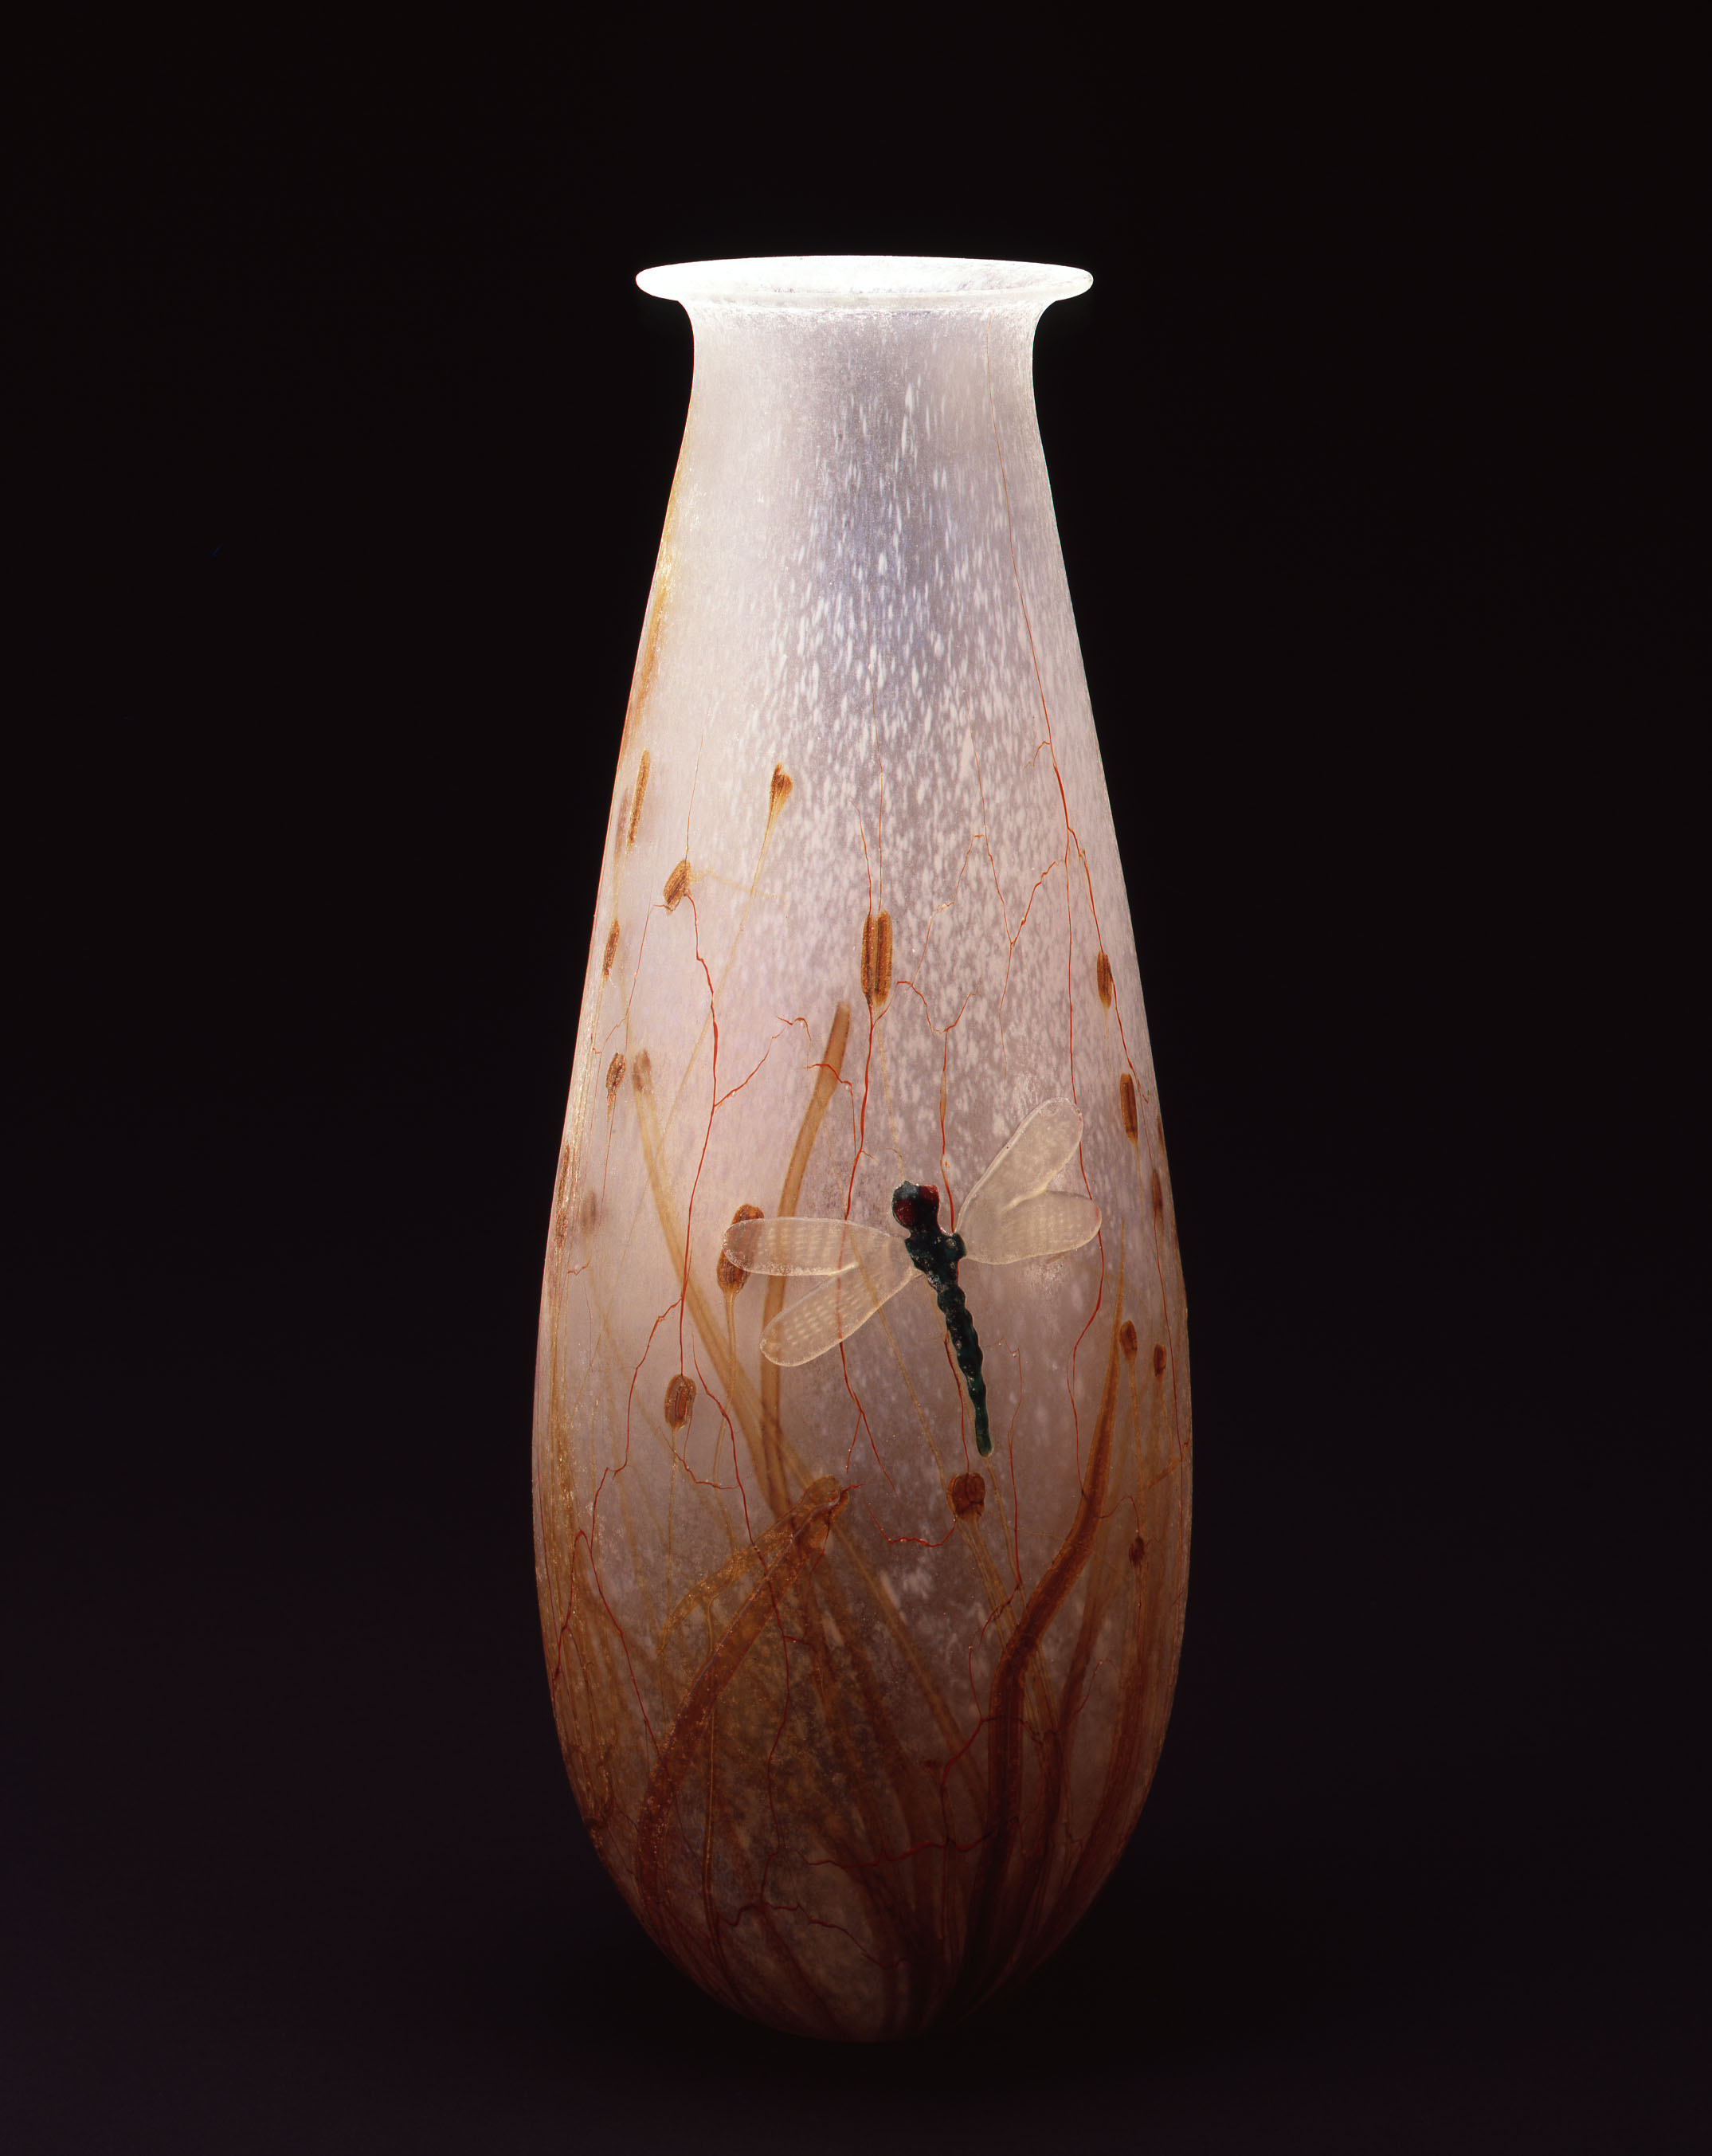  William Morris,&nbsp; Vase with Dragonfly and Grasses  &nbsp; (2004, glass, 21 1/4 x 7 3/4 x 7 3/4 inches), WM.34 